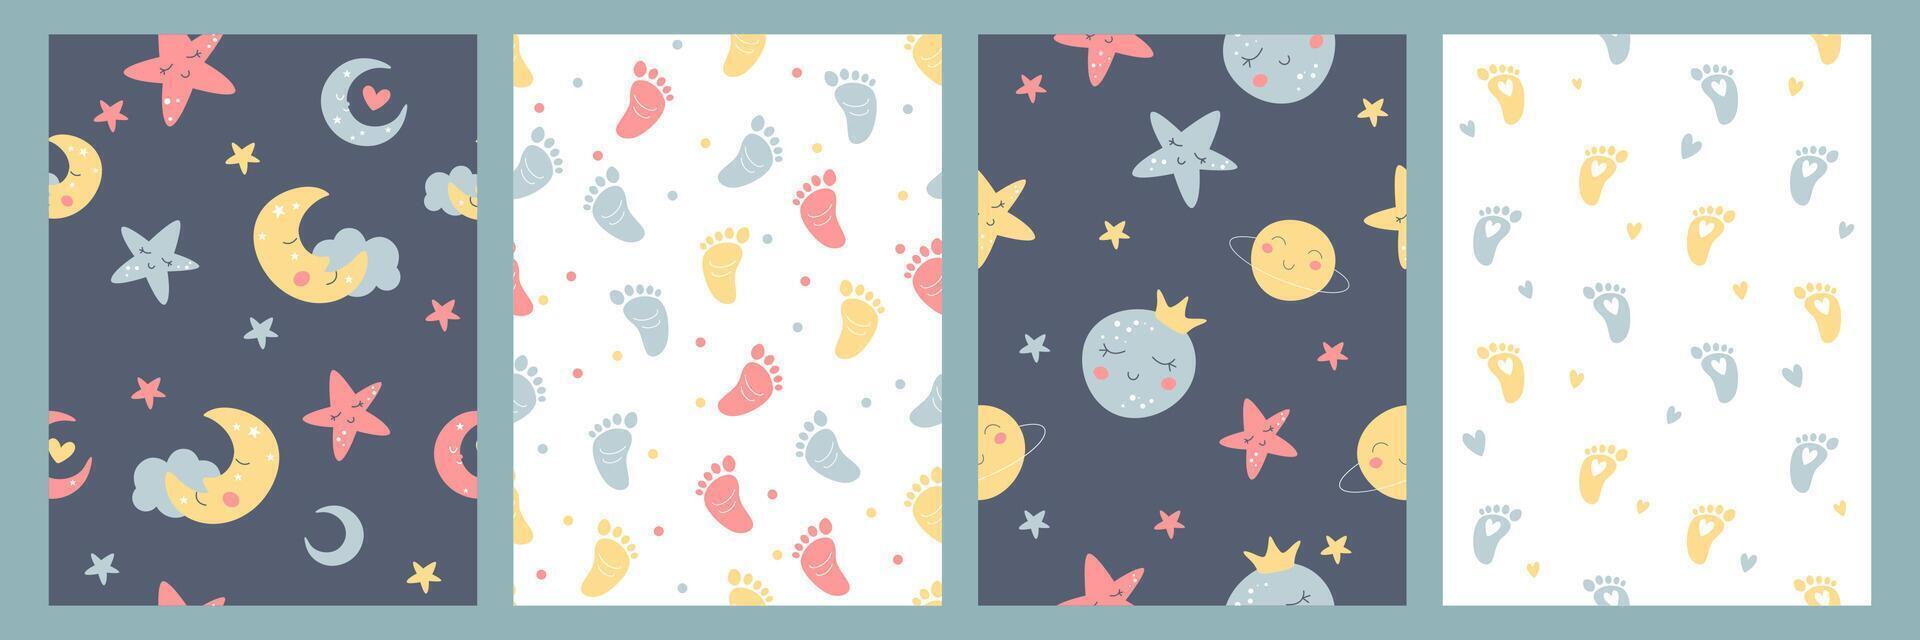 Bohemian baby simple seamless pattern. Hand drawn boho nursery design with starry night sky, cute planet, moon, cloud, and footprints for kids bedroom in scandinavian style. Childish wall art print vector